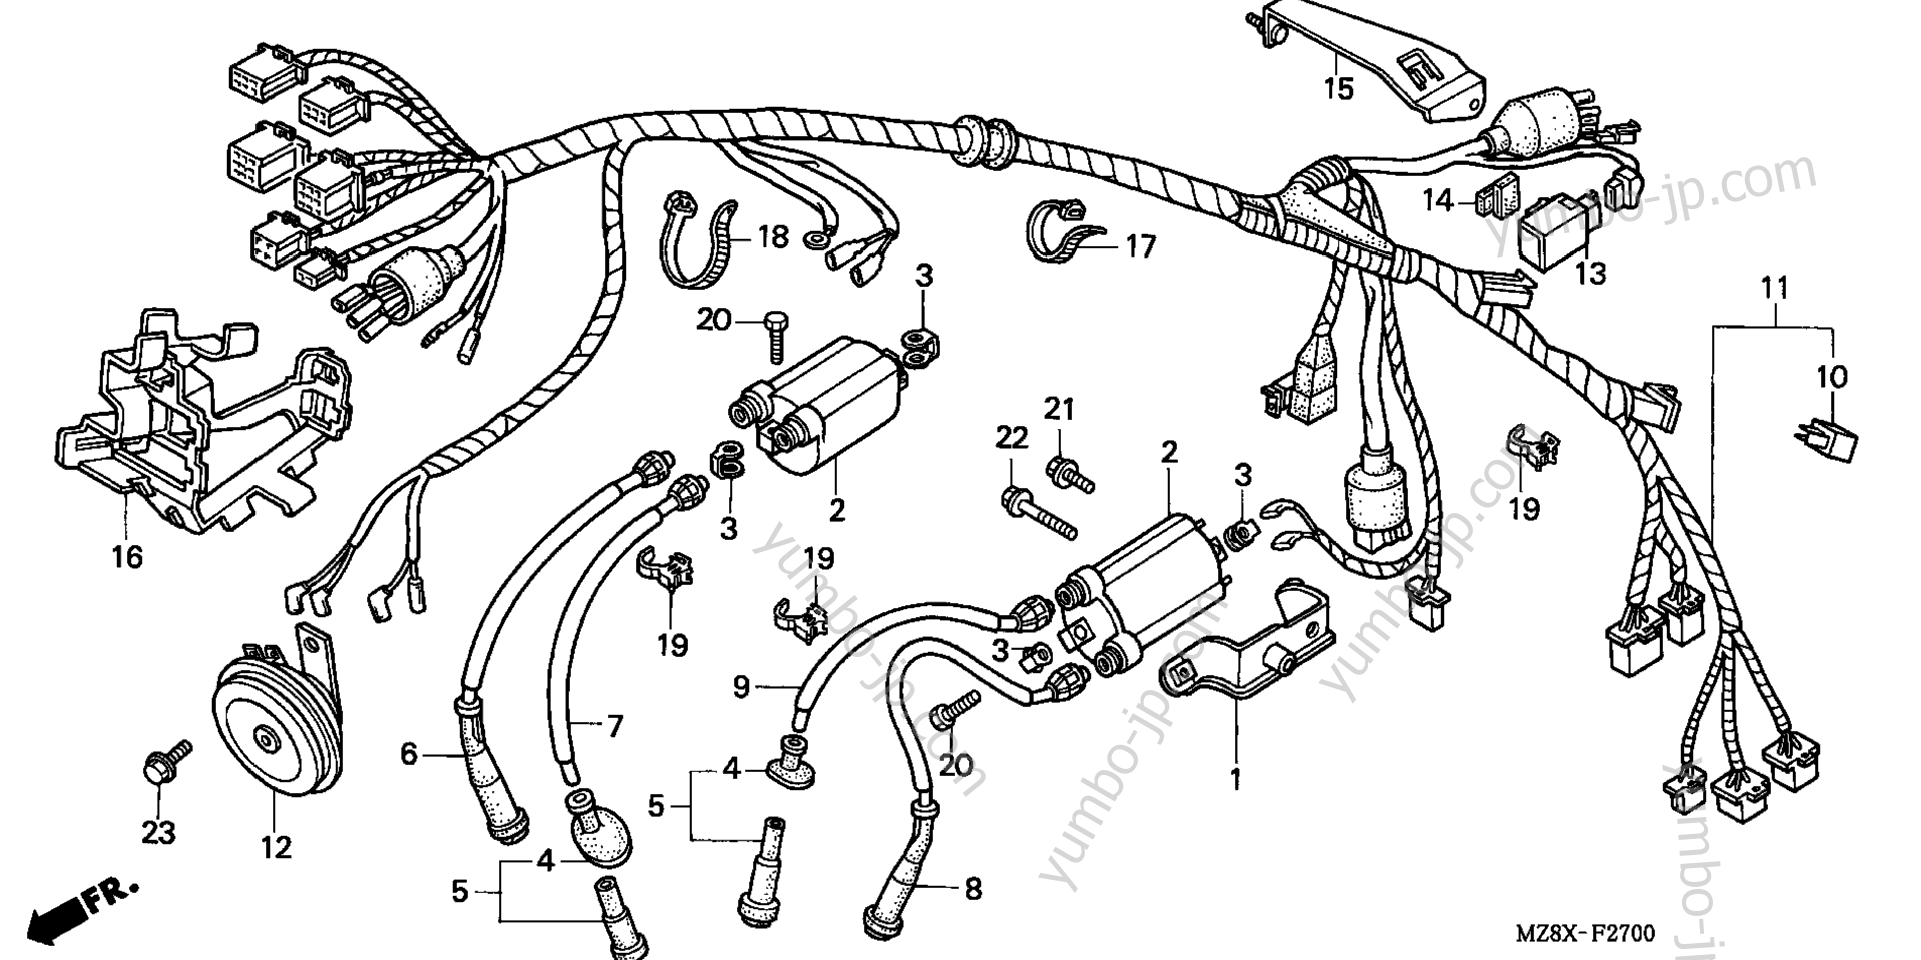 WIRE HARNESS for motorcycles HONDA VT600CD AC 2003 year